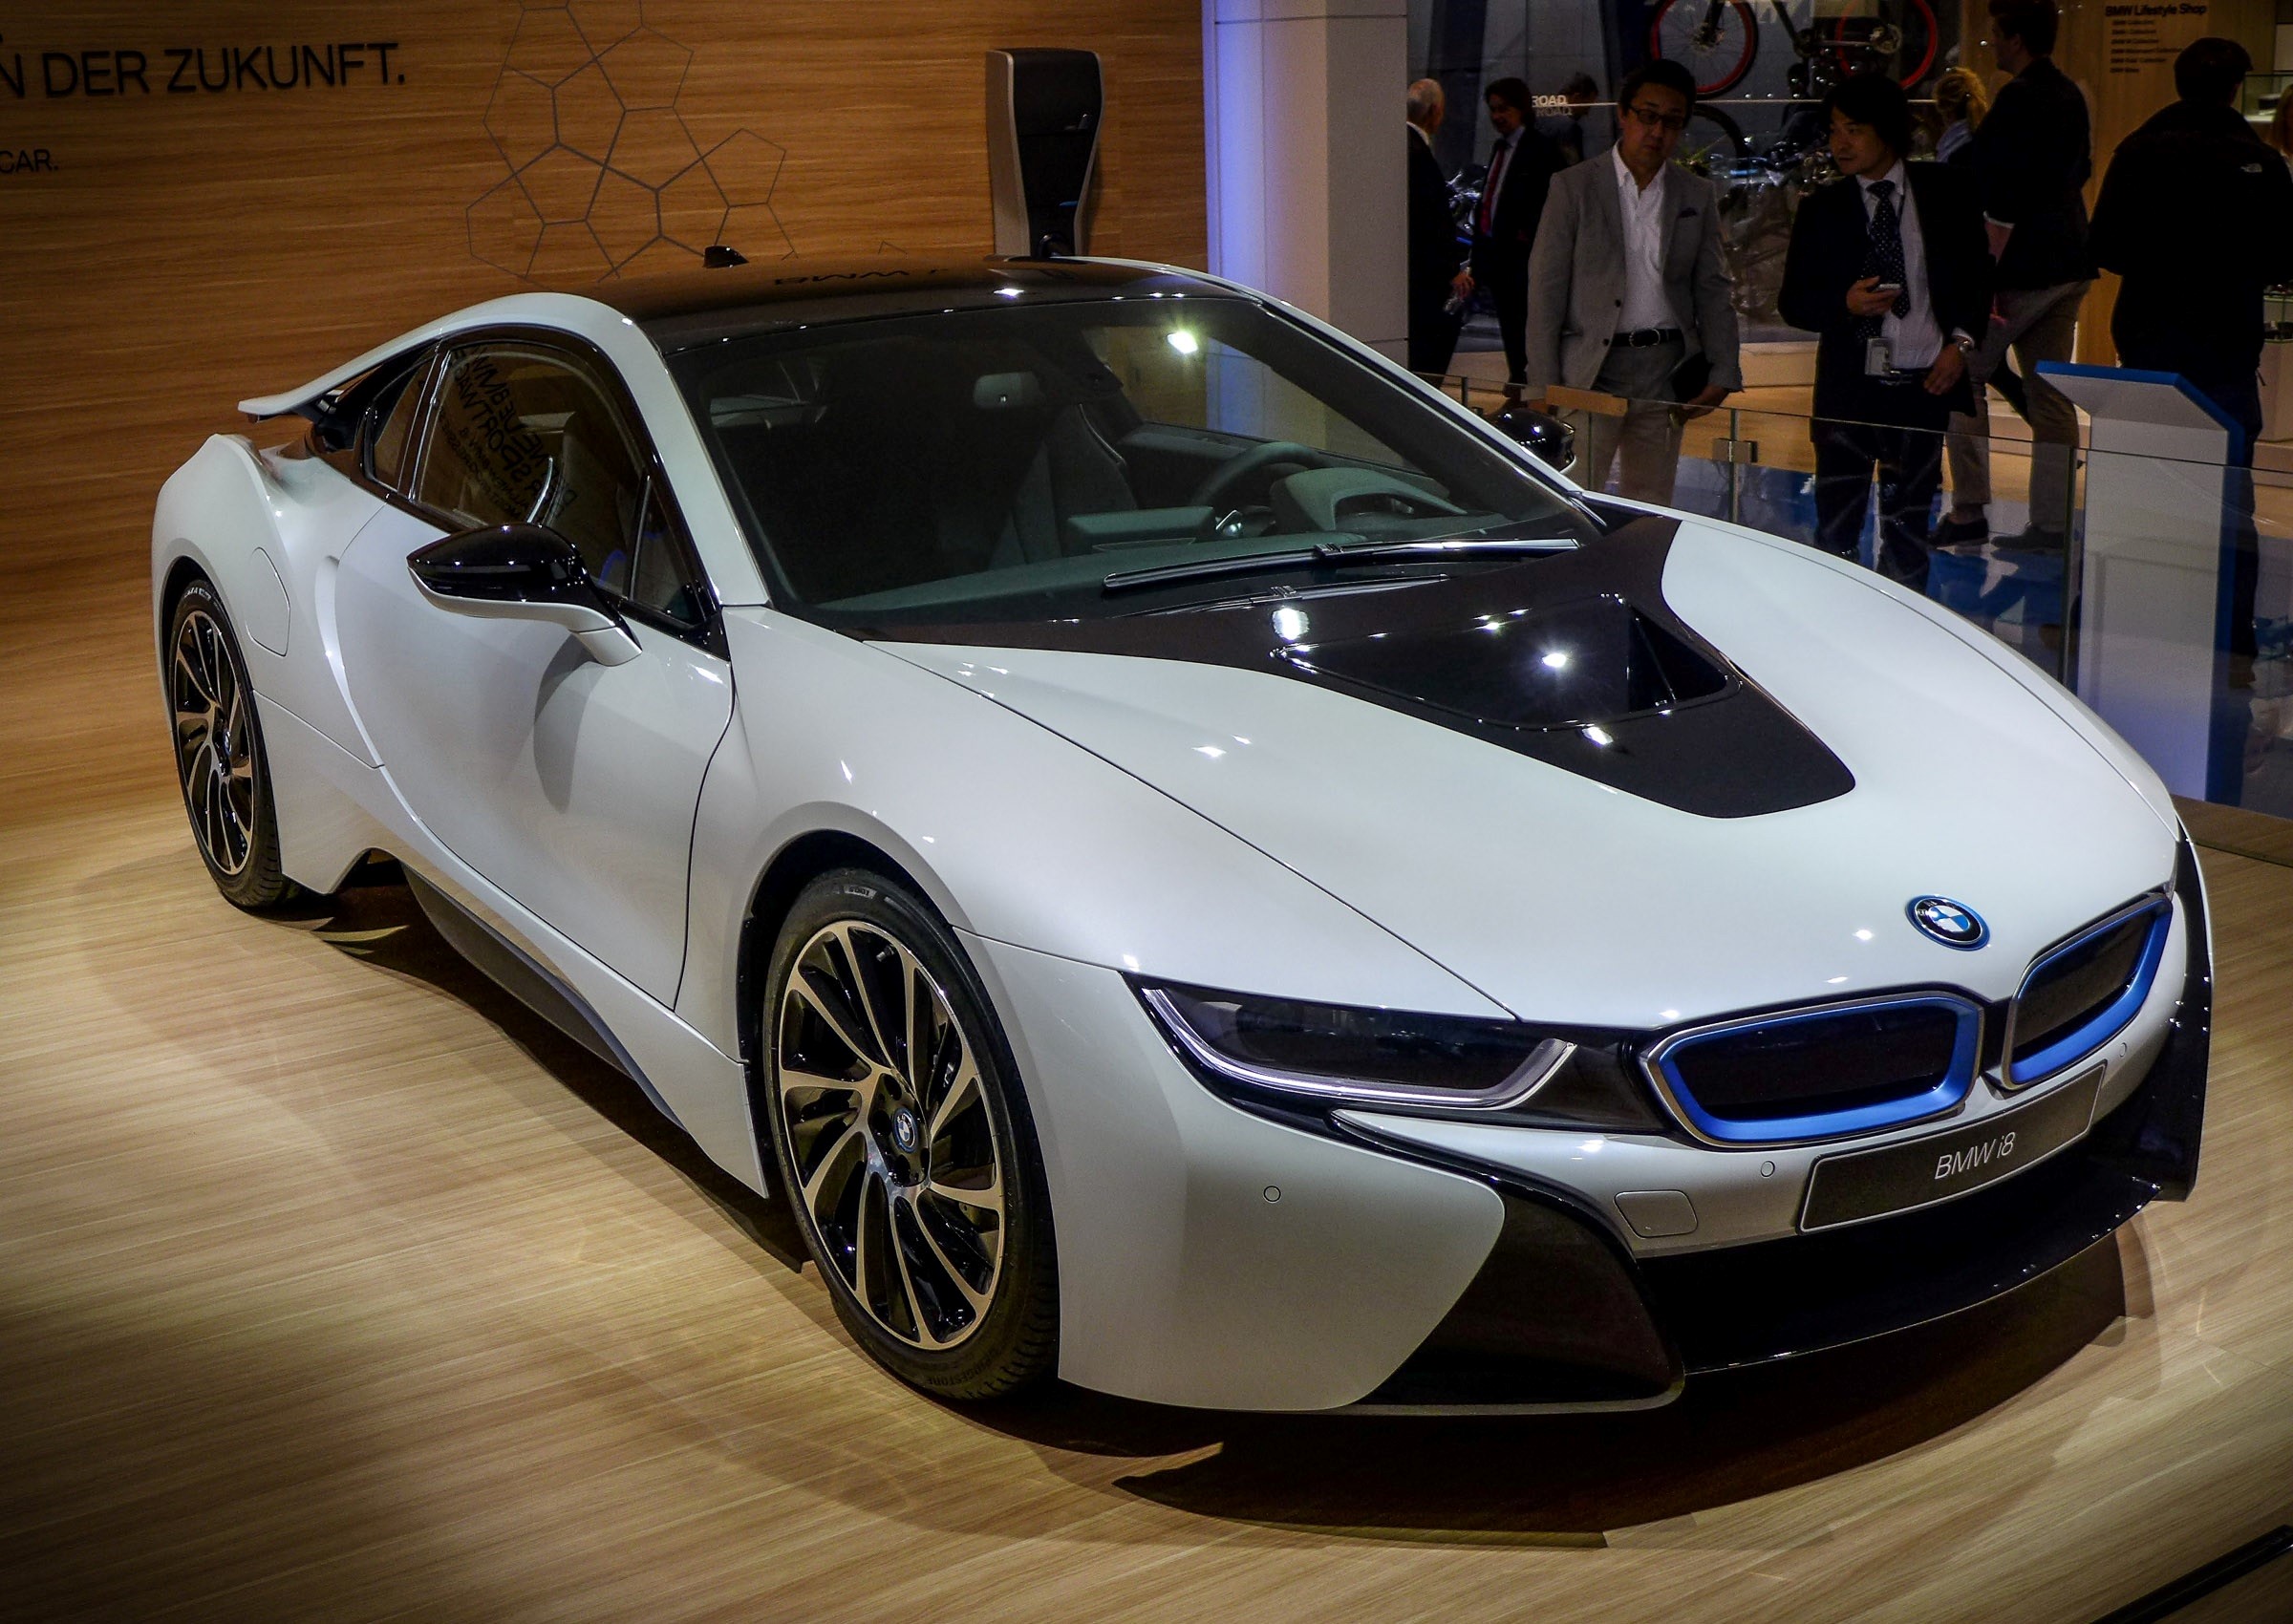 New Crystal White Bmw I8 Luxury Two Seater Car Wallpaper HD